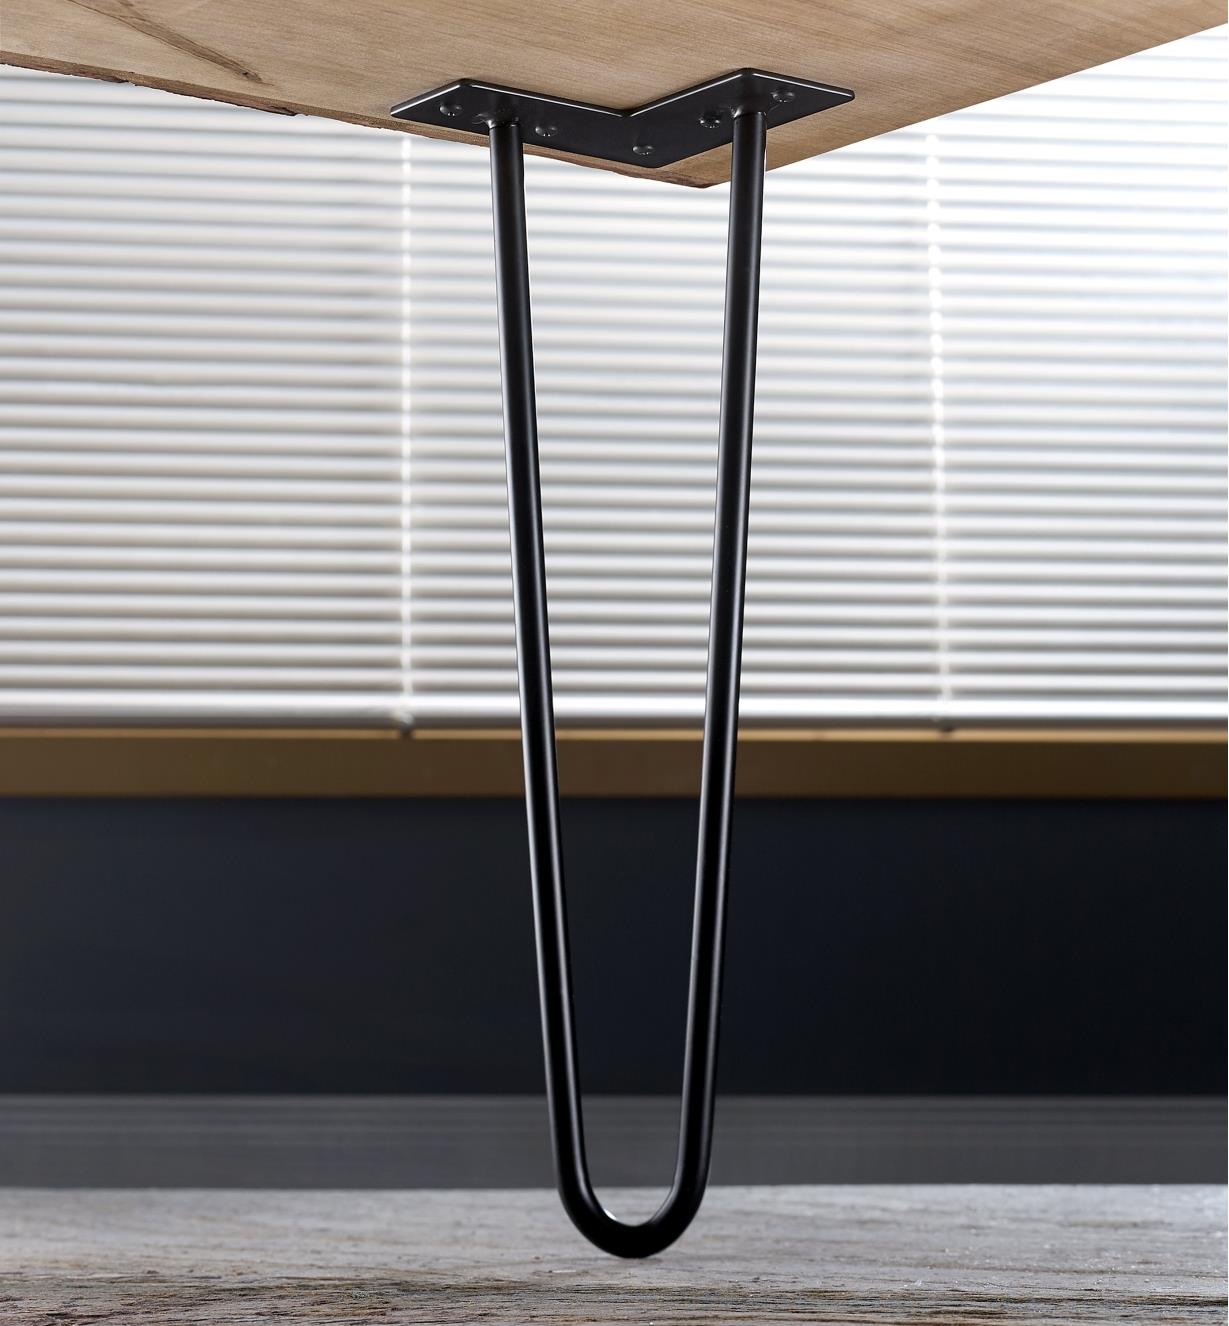 A 16-inch hairpin leg mounted on the corner of a live-edge coffee table